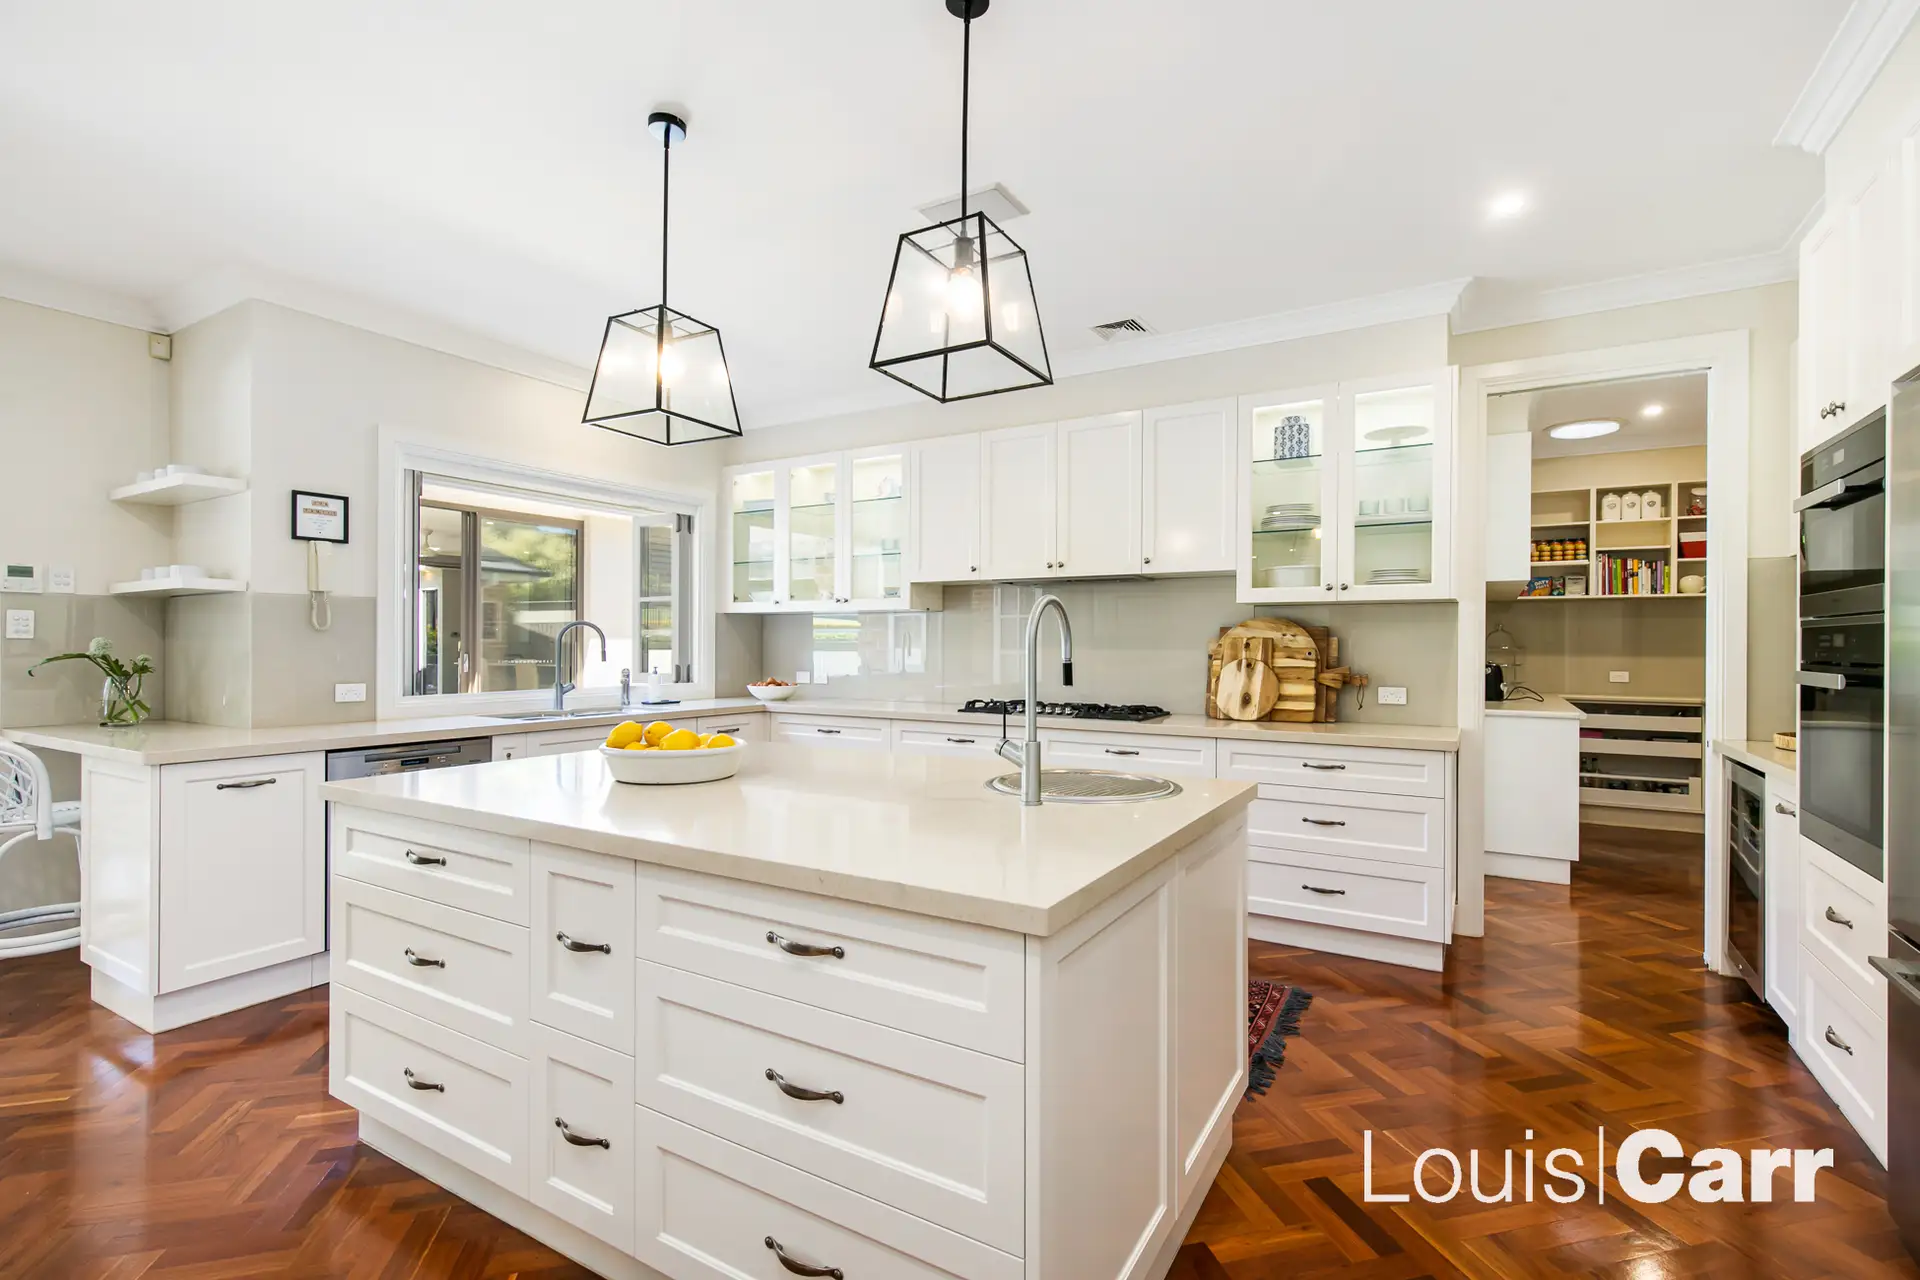 Photo #5: 23 Doris Hirst Place, West Pennant Hills - Sold by Louis Carr Real Estate